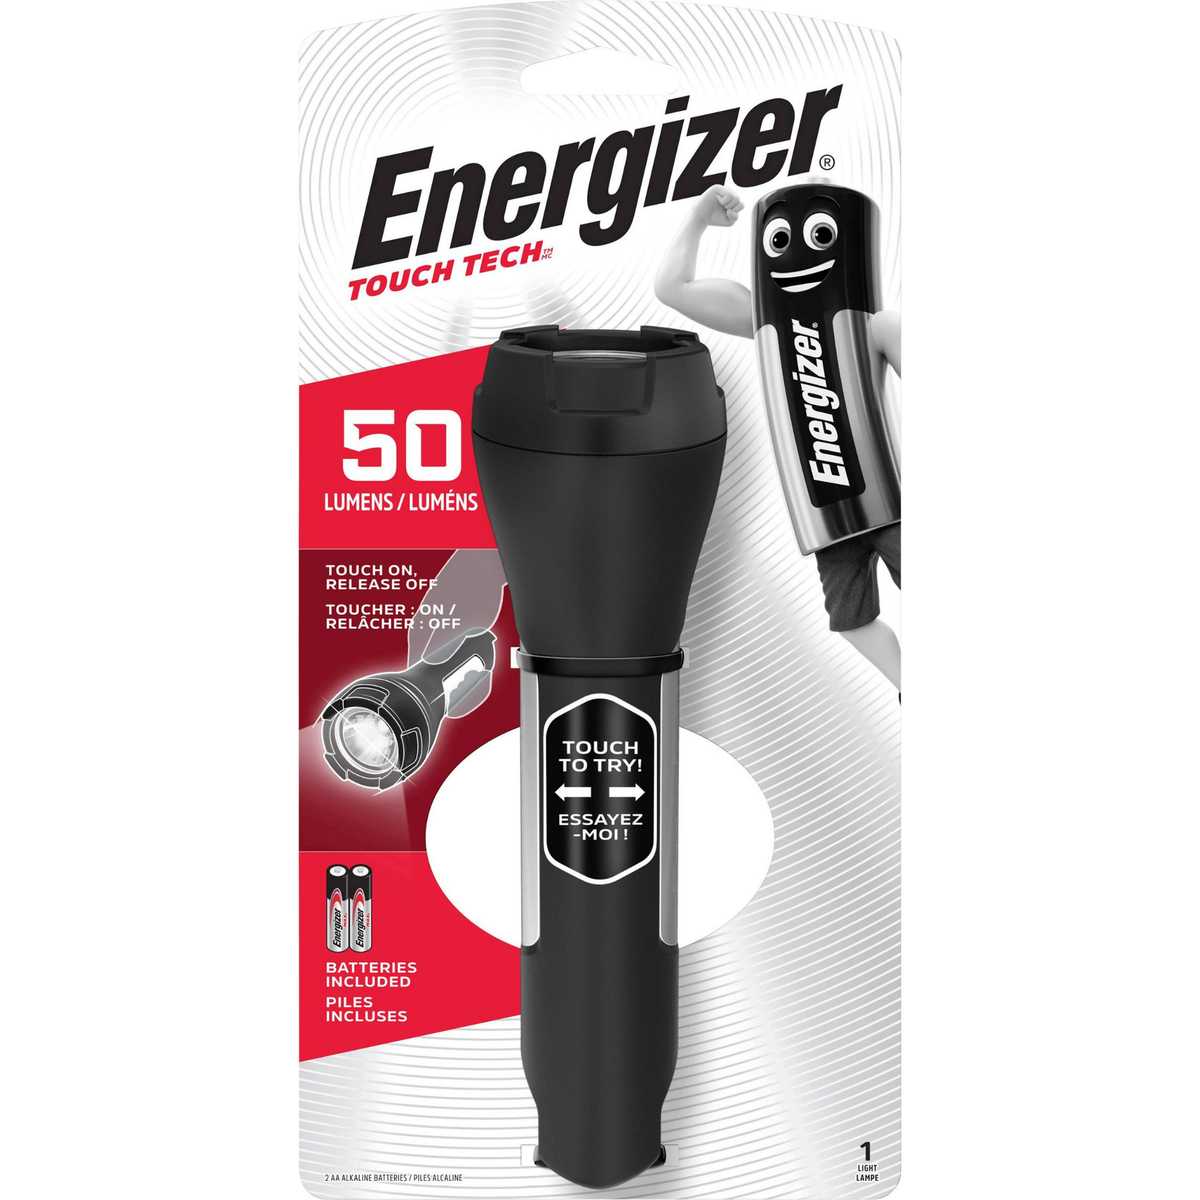 Energizer Touch Tech LED 50 lumens Torch with 2 AA Batteries, THH21